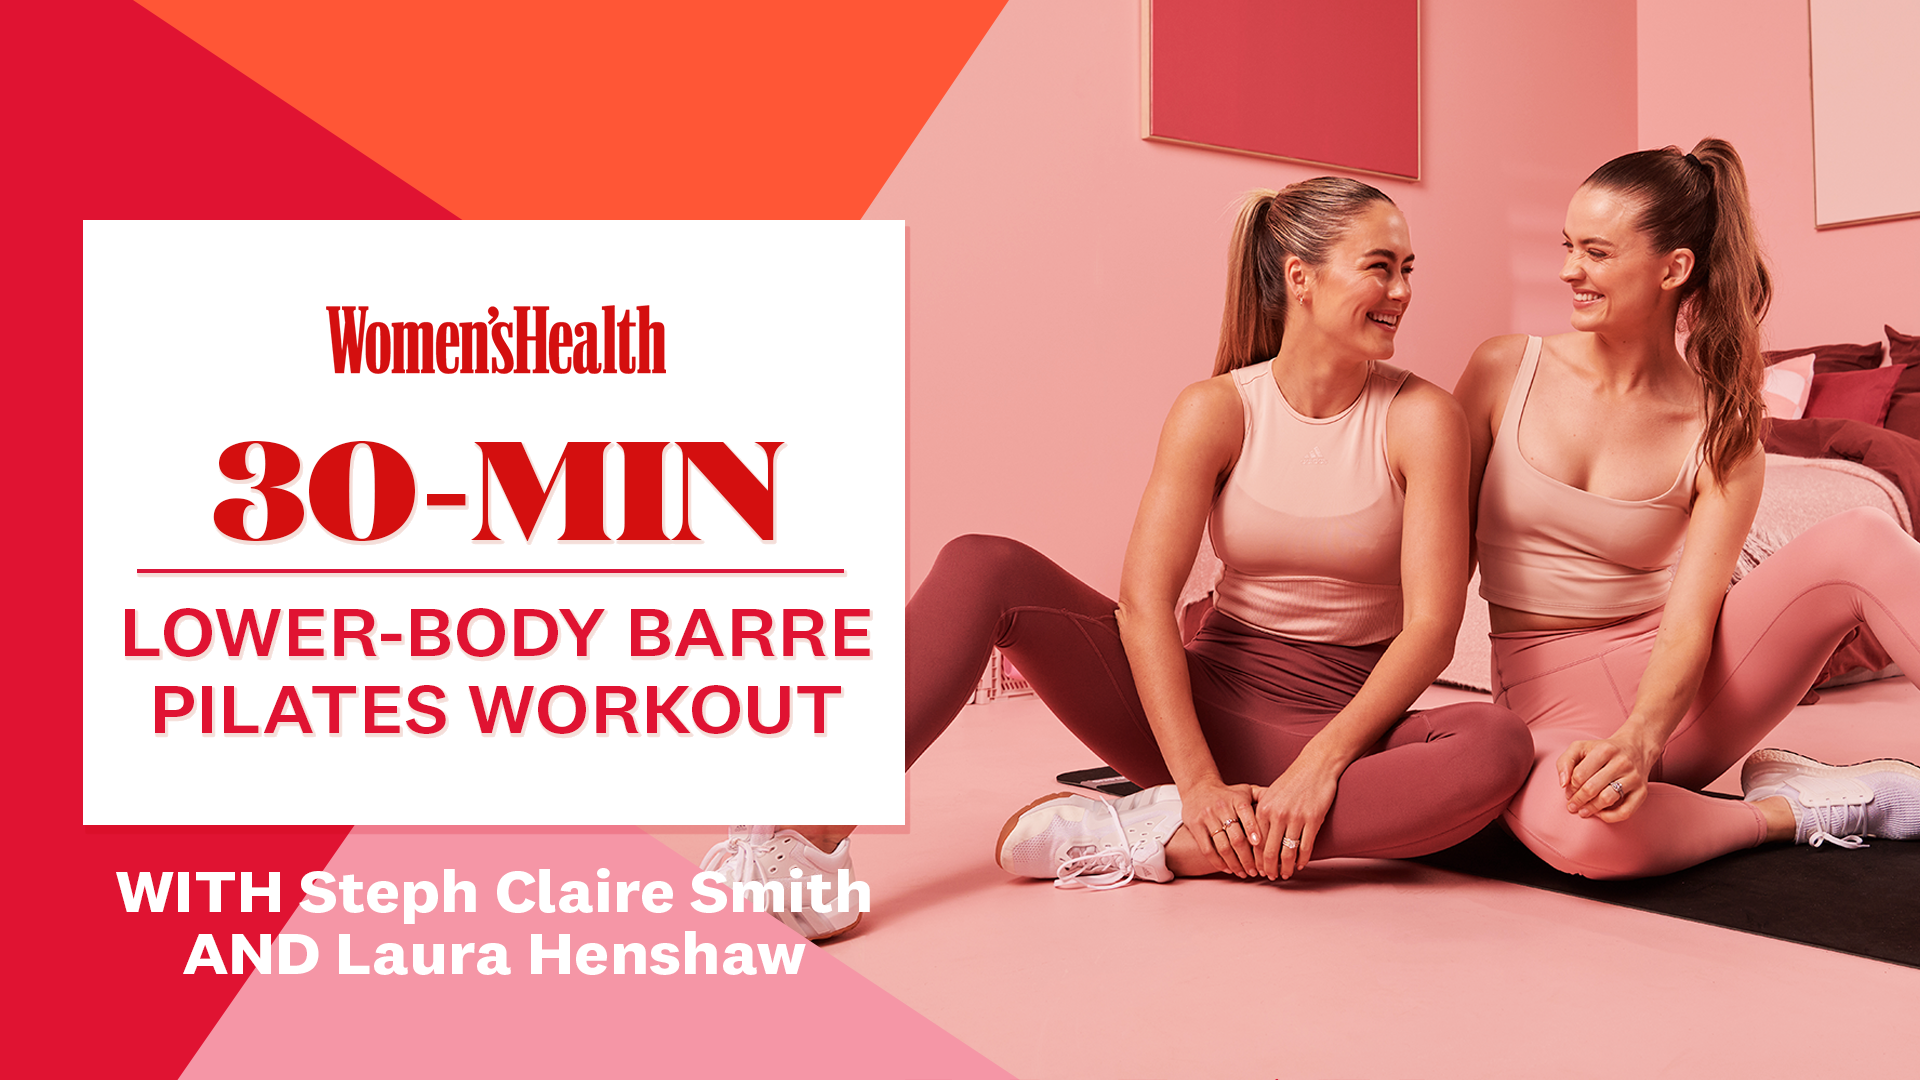 14-day Pilates challenge from Steph Claire Smith & Laura Henshaw